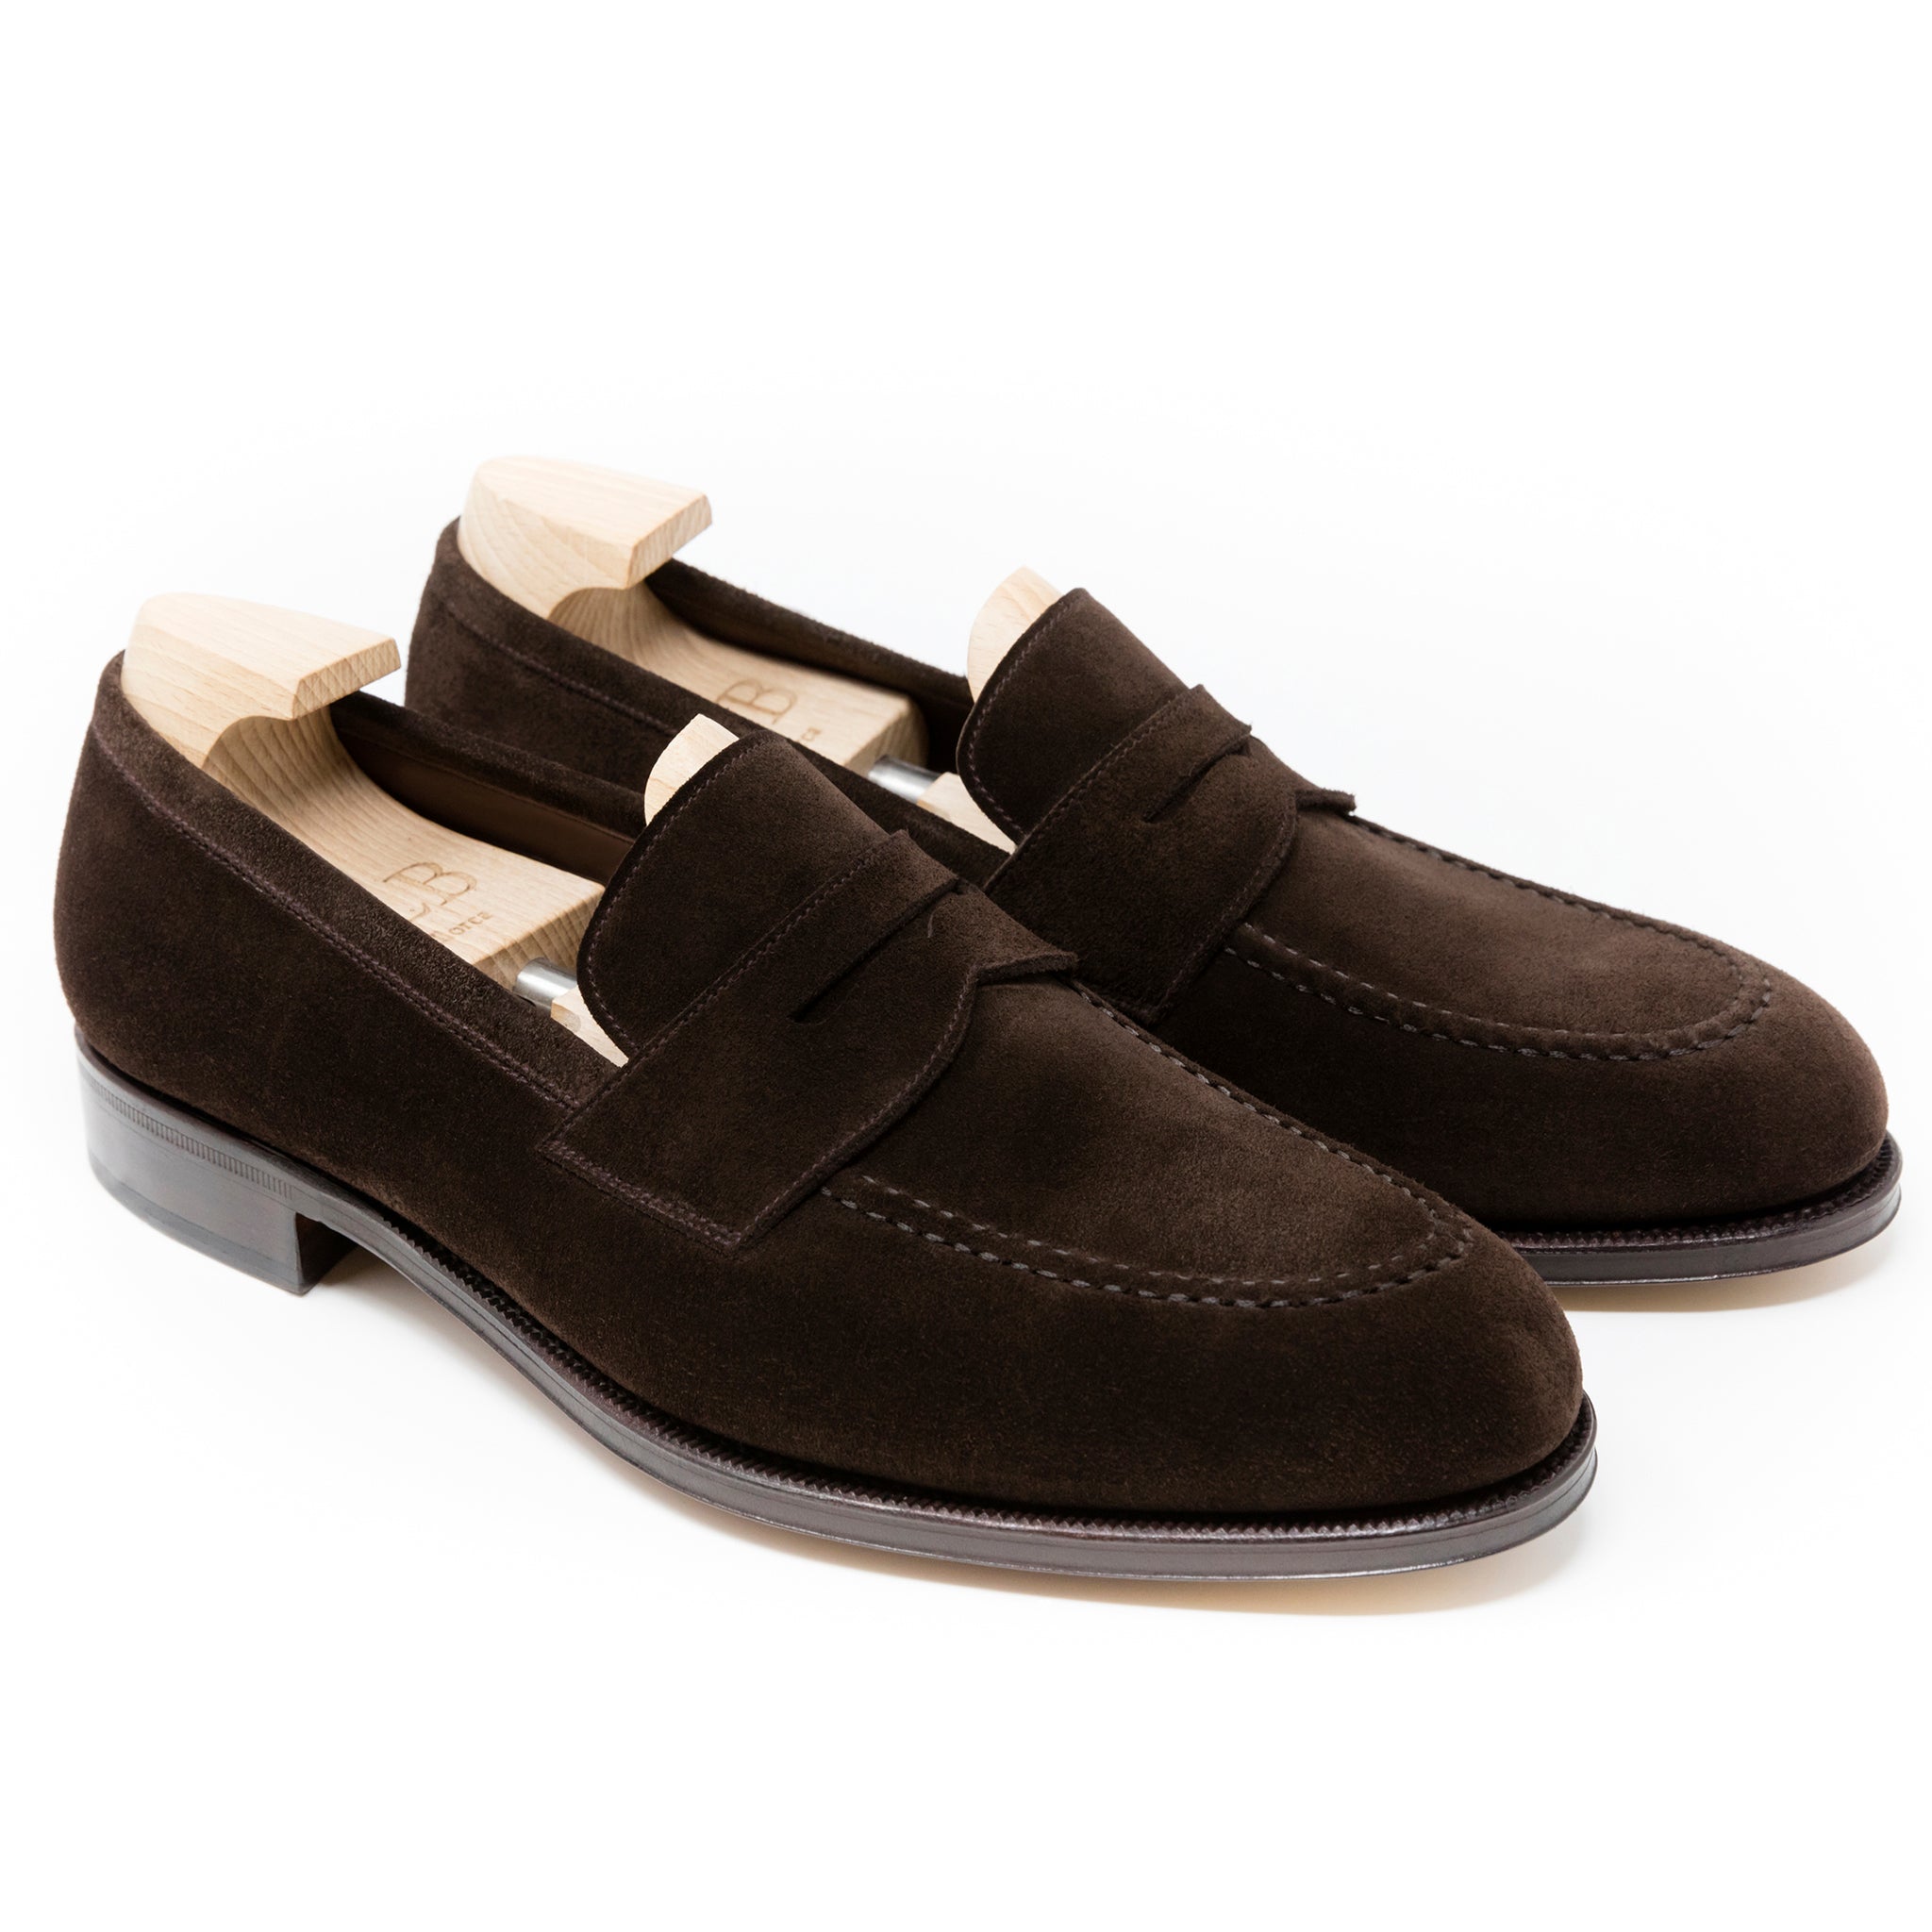 TLB Mallorca | Leather loafers | model Jones Suede brown 545